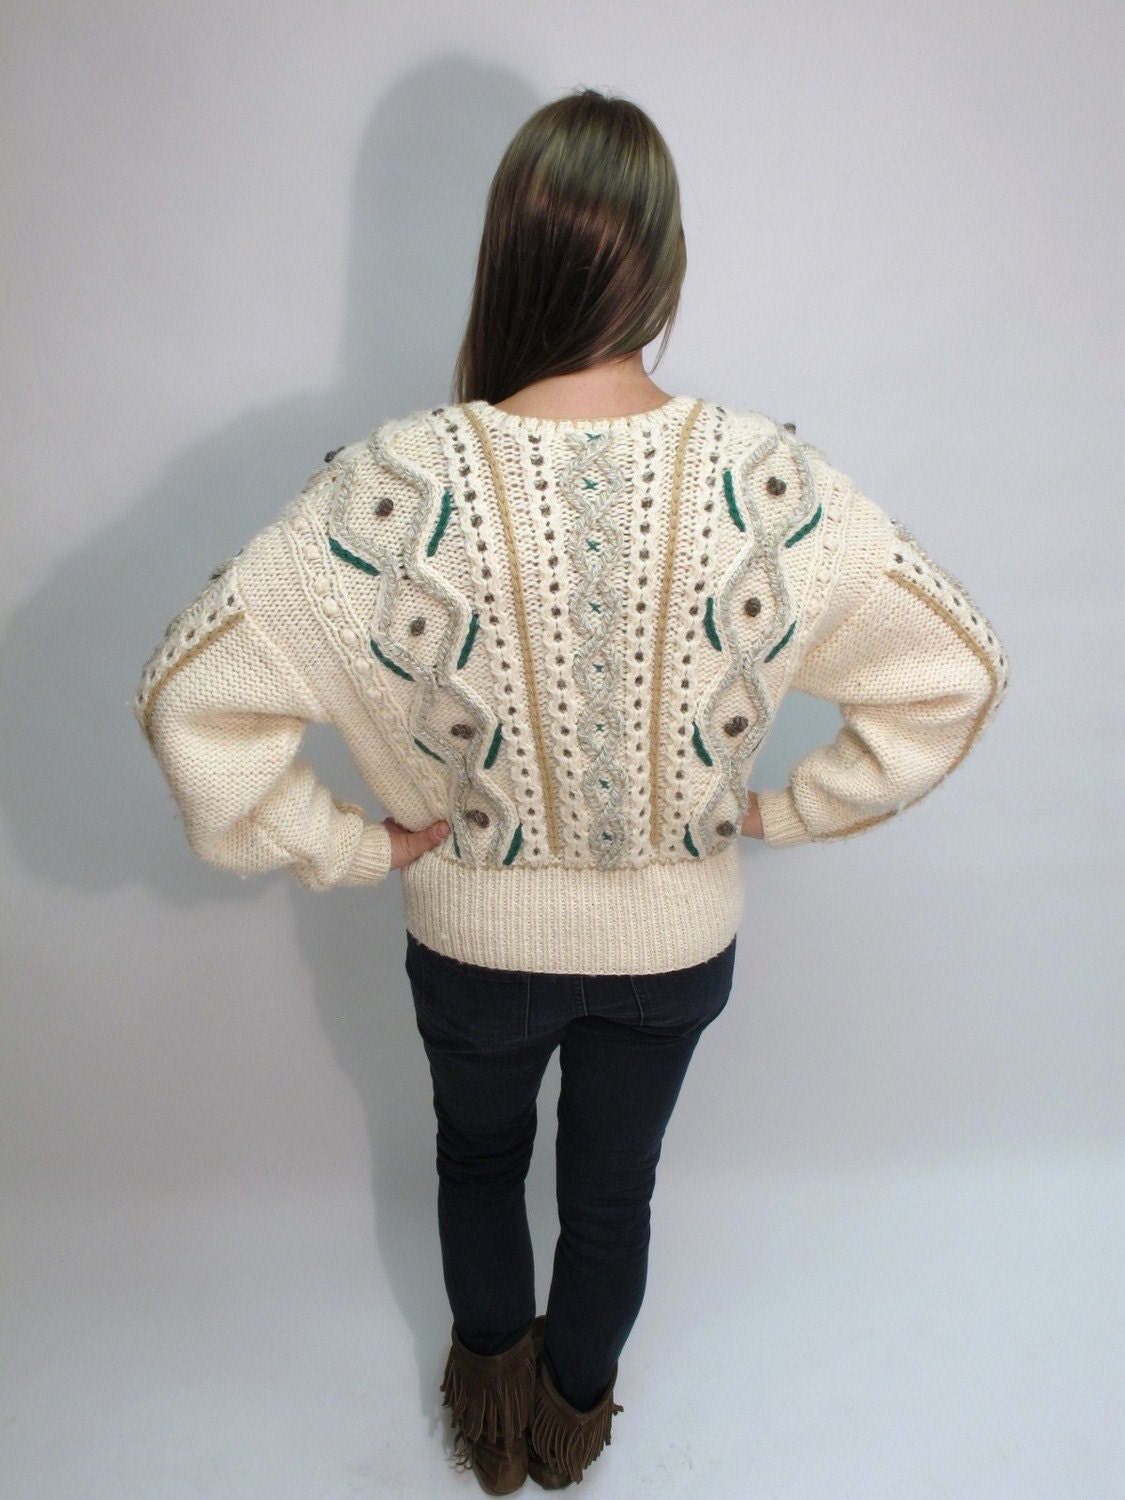 The Chunky 1980s Cable Knit Cardigan.